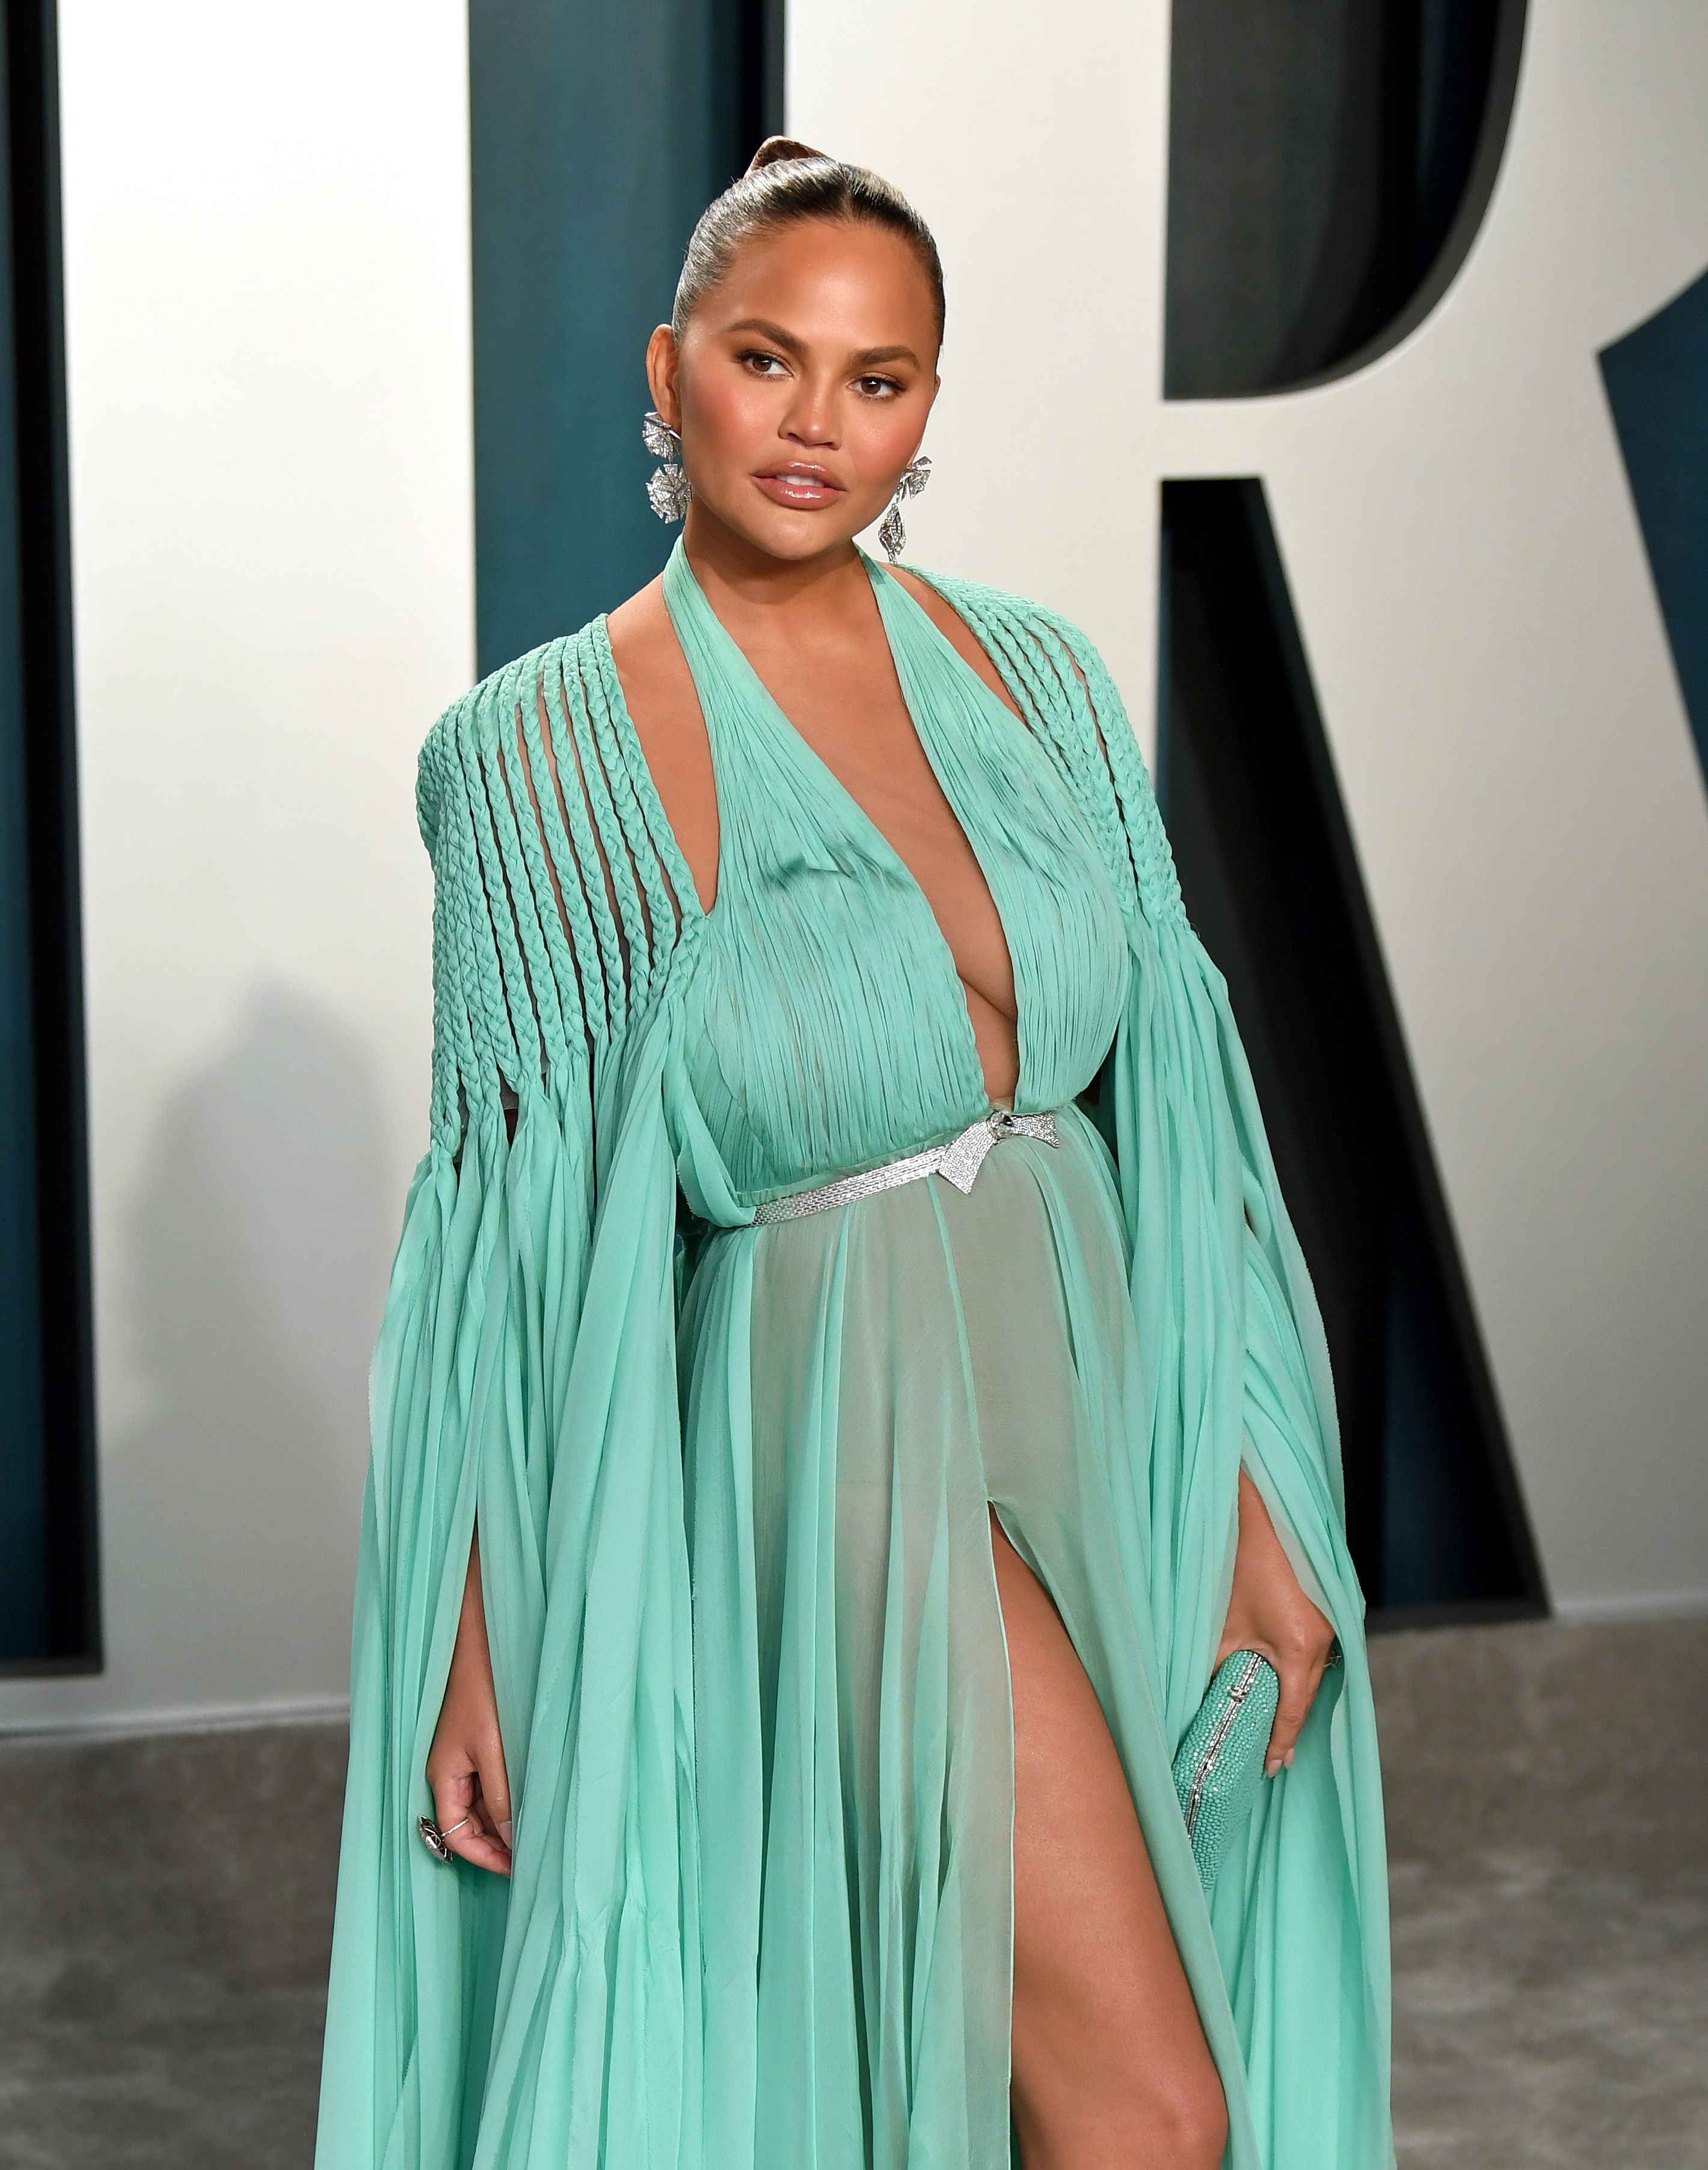 Chrissy Teigen at the 2020 Vanity Fair Oscar Party in February 2020 in Beverly Hills | Source: Images